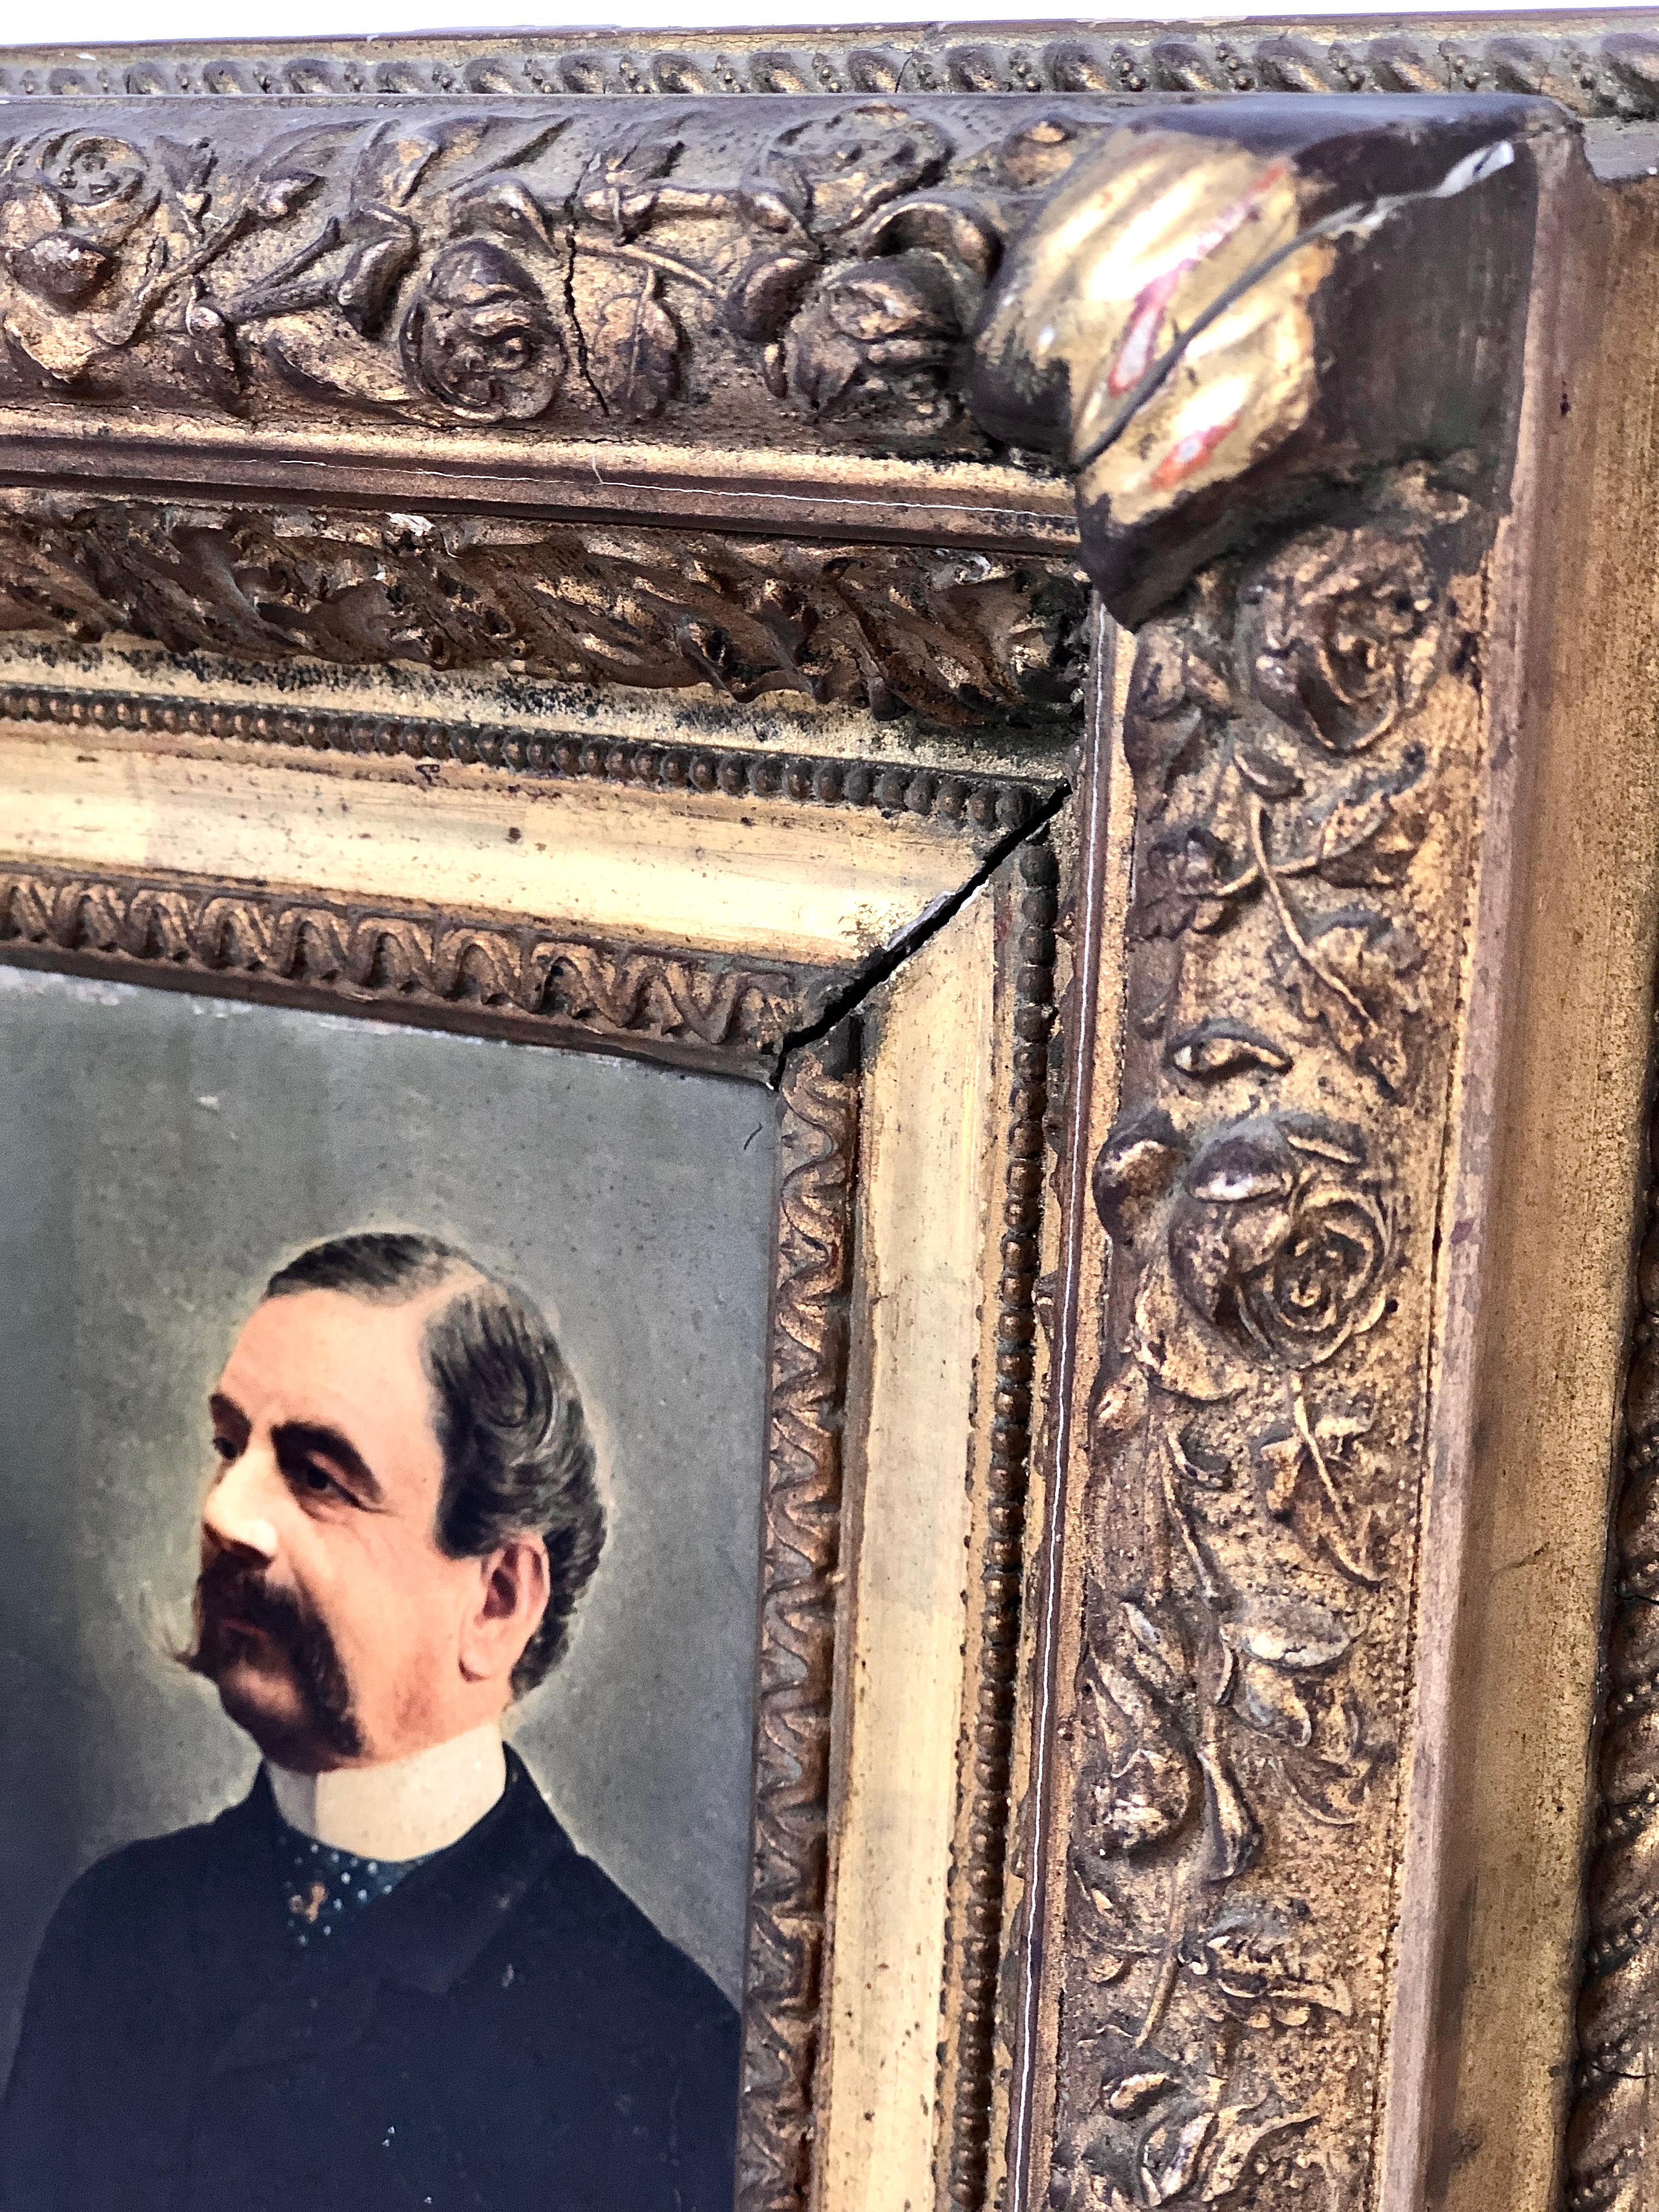 A nice portrait in a gilded wooden frame, from the 19th century. Bought in a castle in the south of France.

Quite often nowadays, the lords and ladies have to sell some of their furniture to finance the castle's restorations. In that case, this